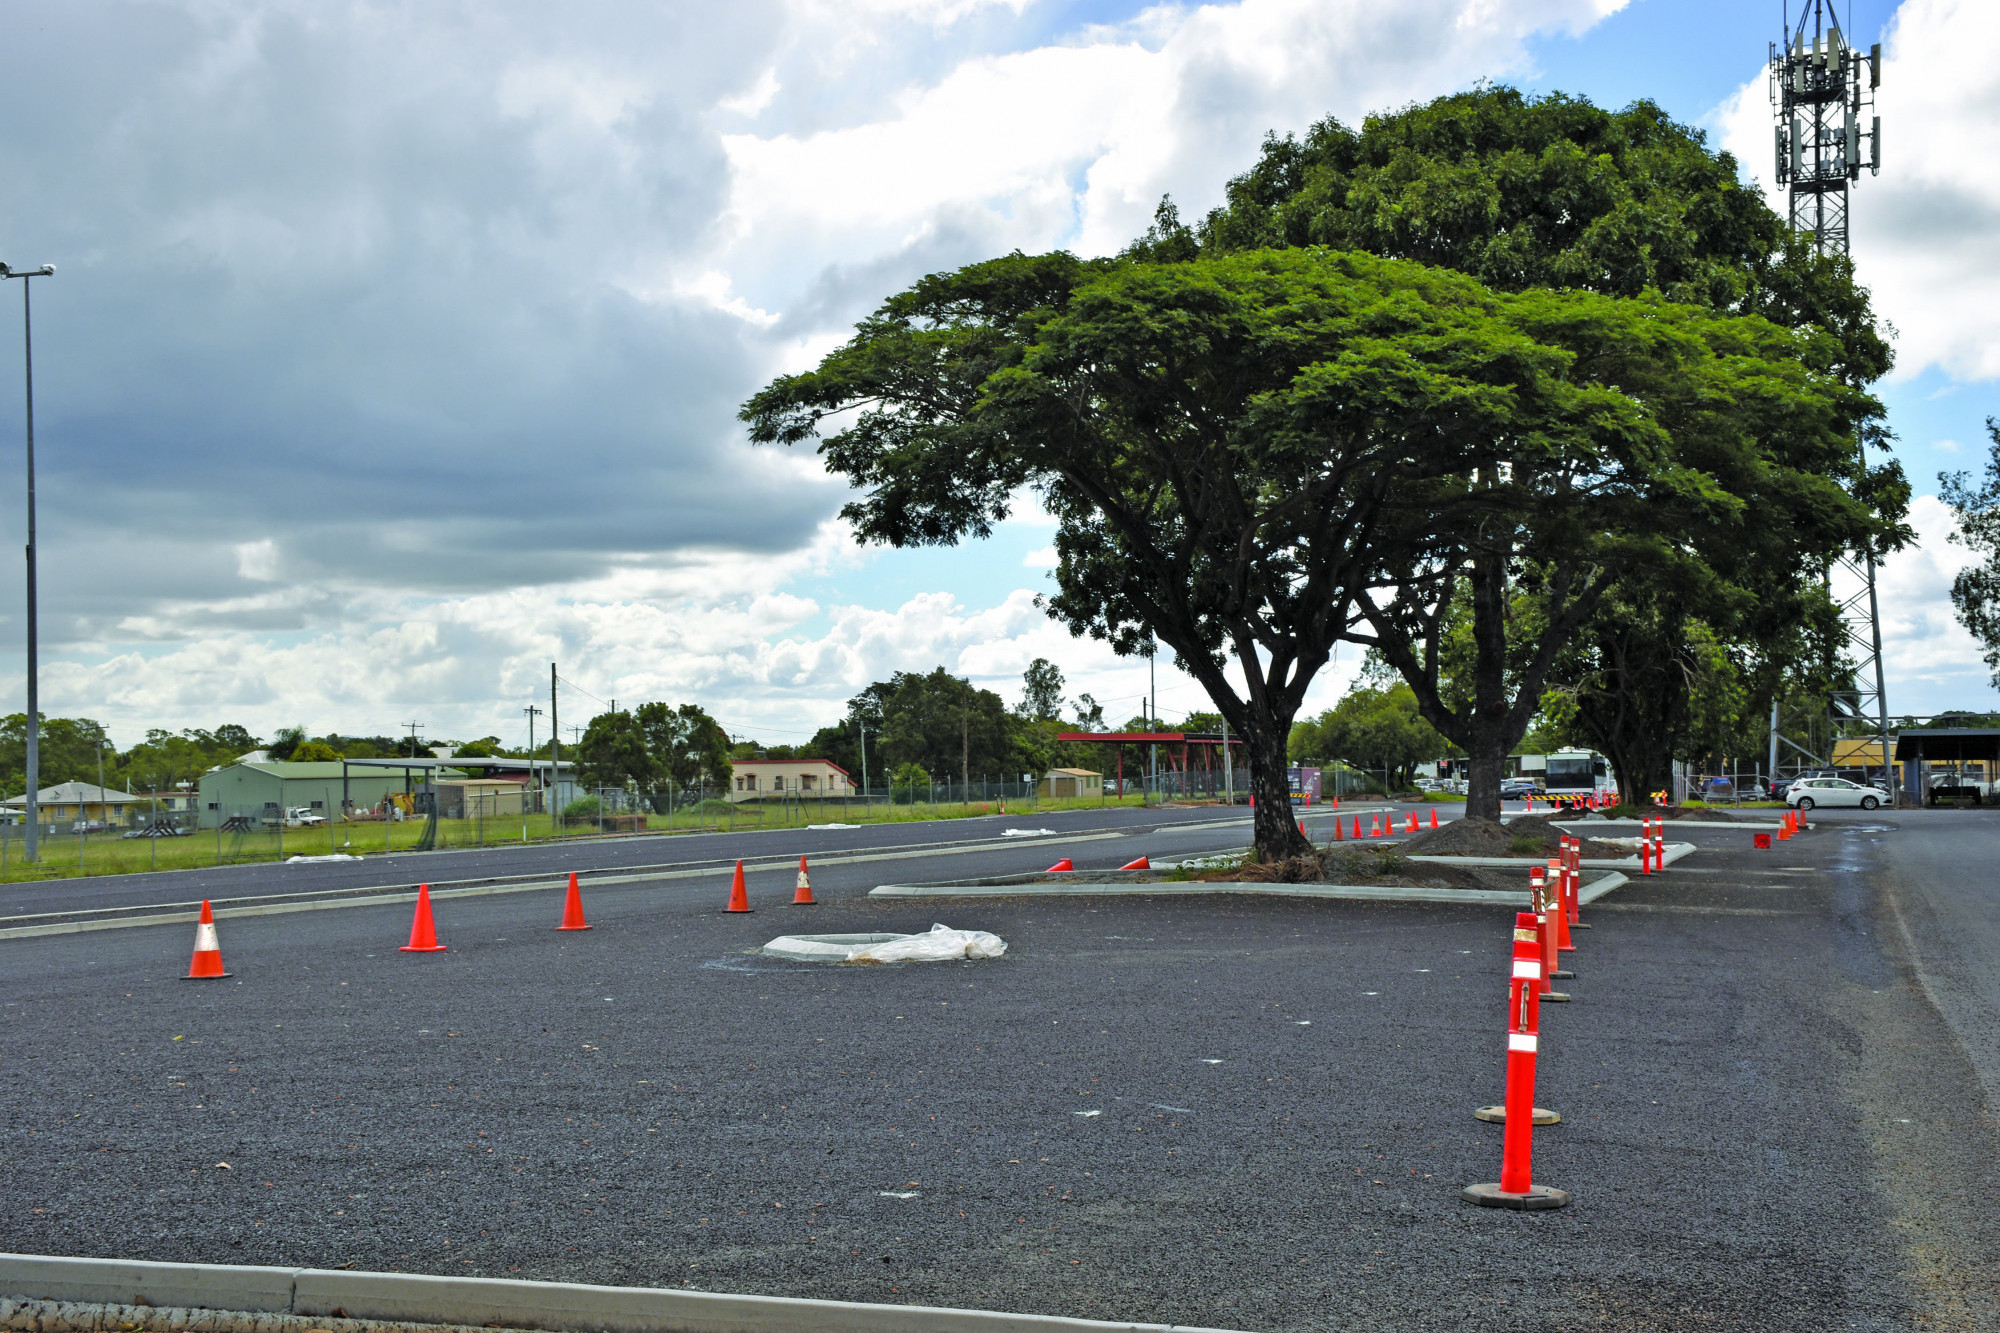 More parking in the main street – one of the development programs currently underway by Mareeba Shire Council.